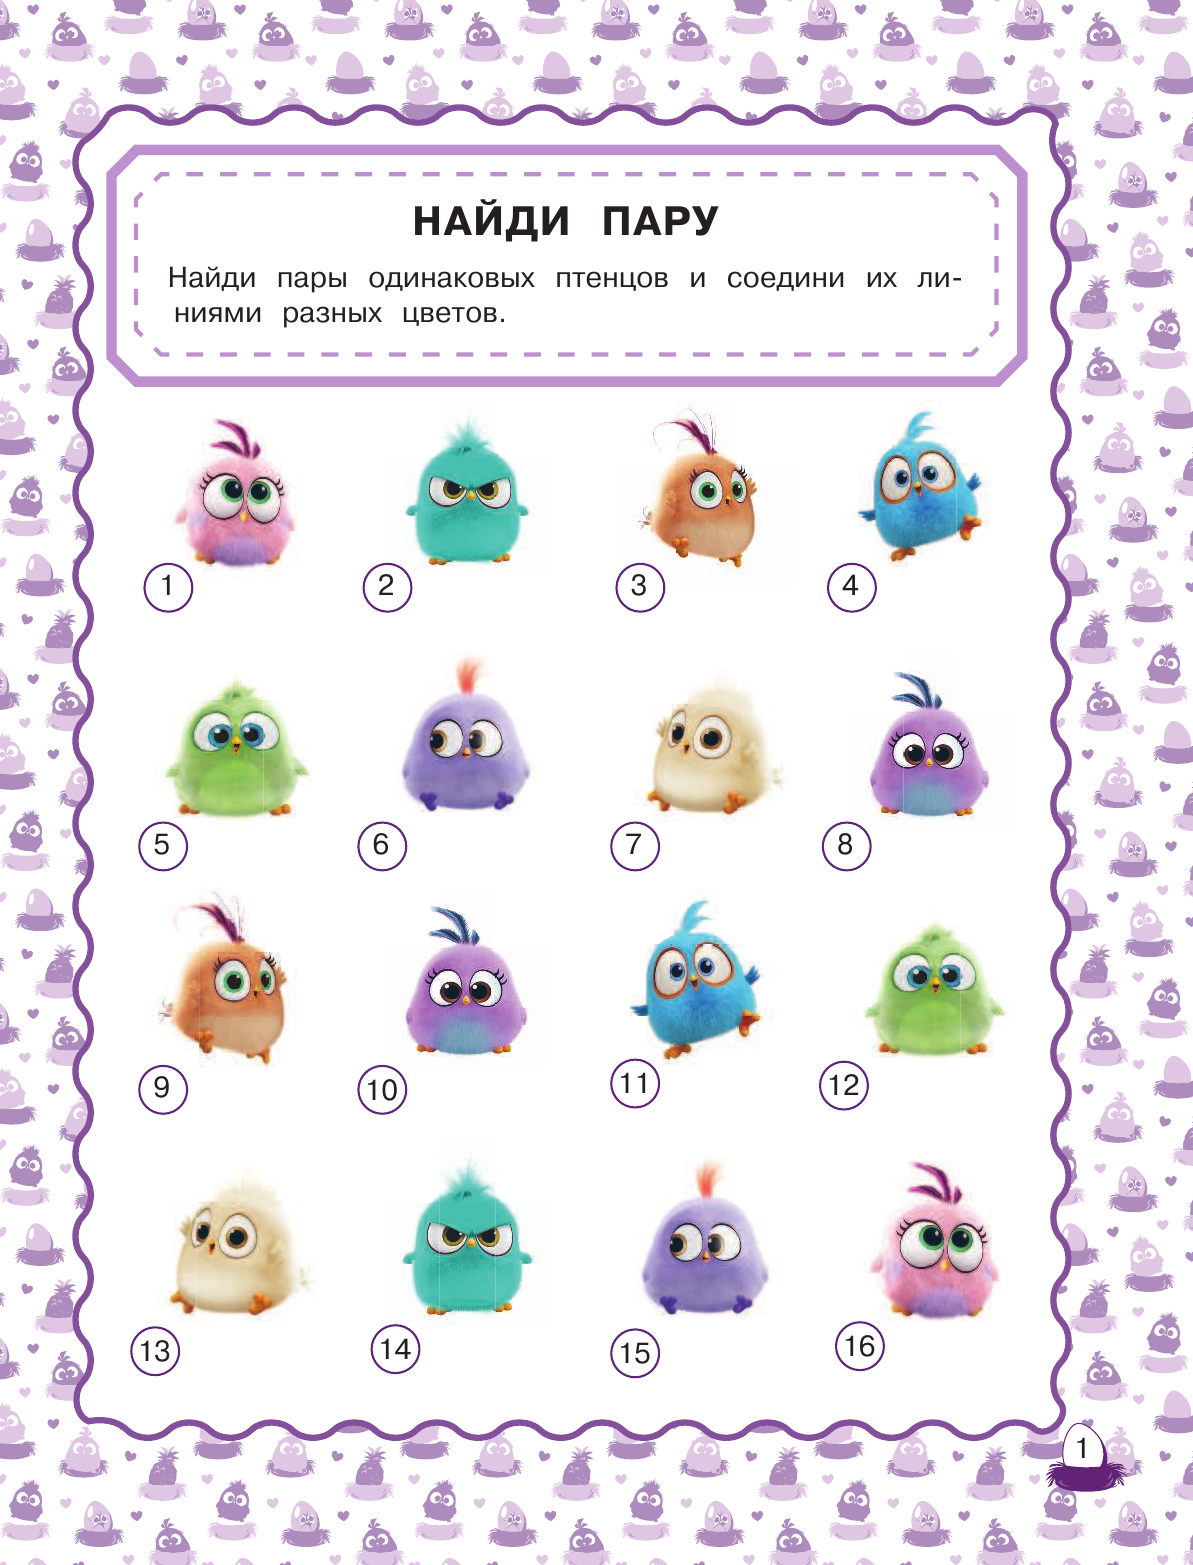  Angry Birds. Hatchlings. Игры с наклейками (с наклейками) - страница 2